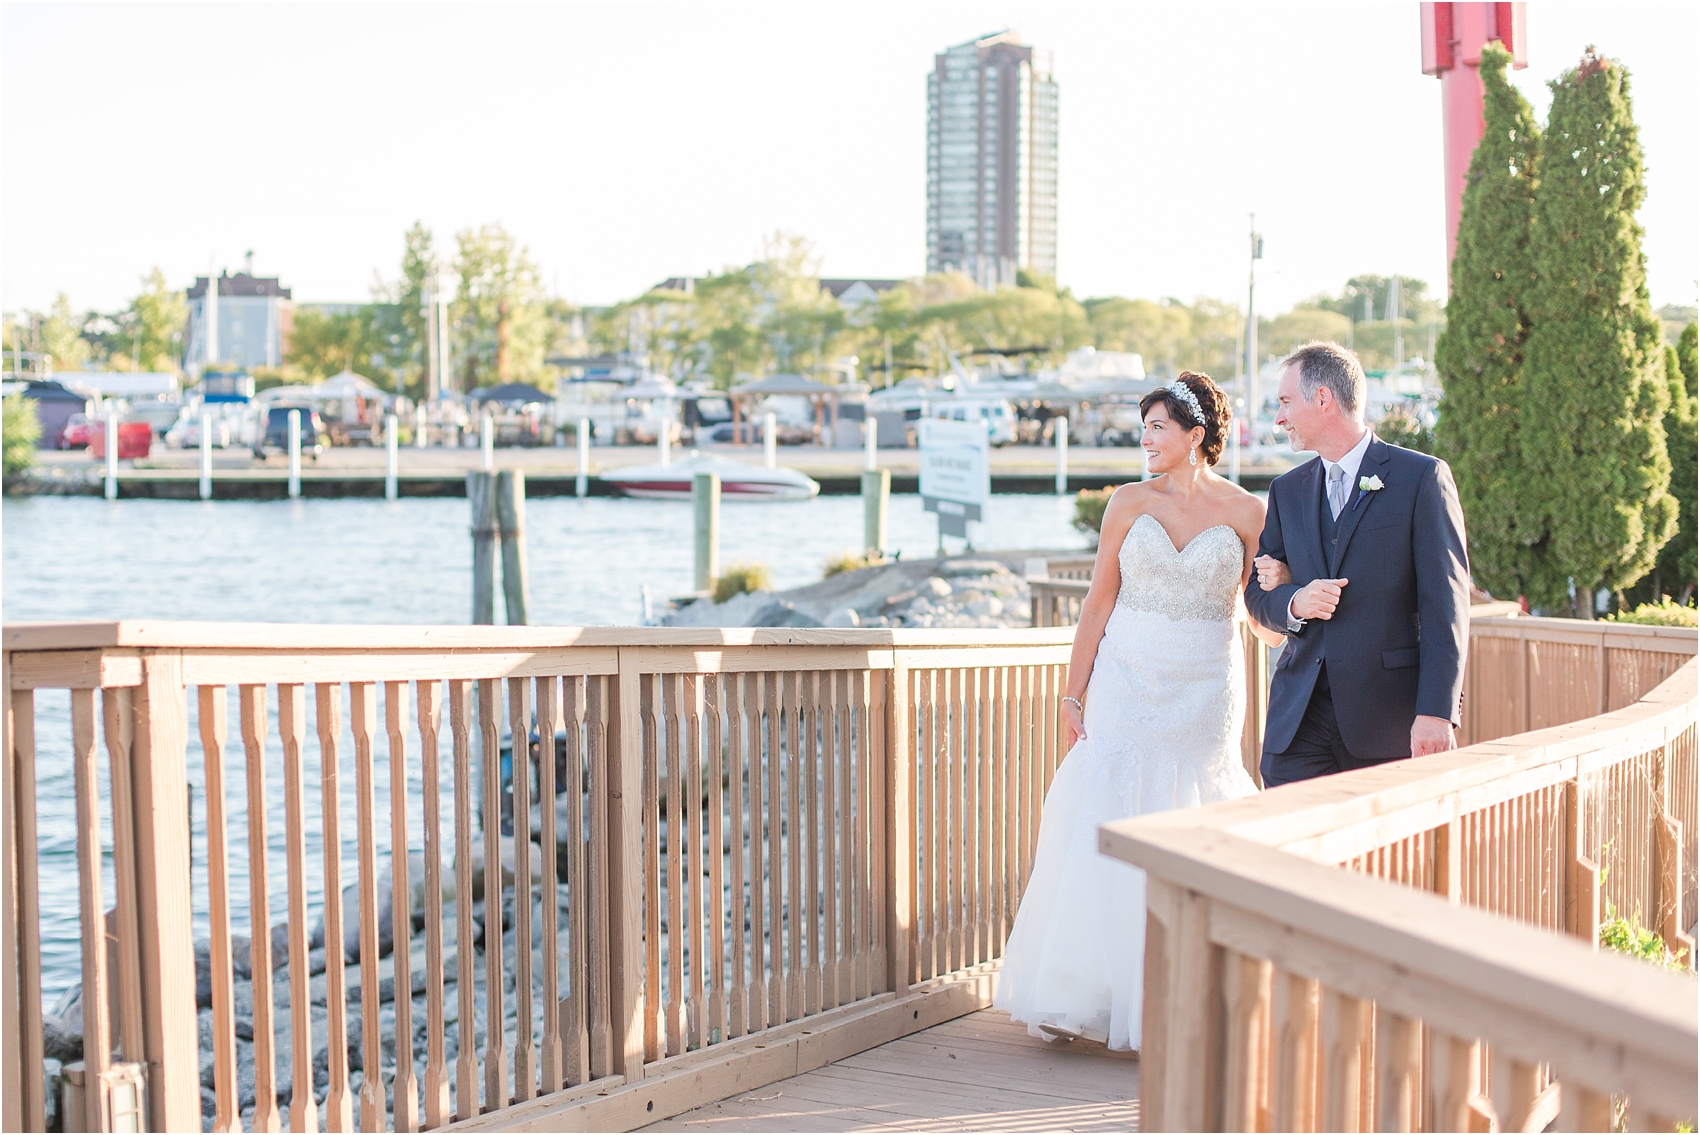 classic-natuical-inspired-wedding-photos-on-infinity-ovation-yacht-in-st-clair-shores-mi-by-courtney-carolyn-photography_0069.jpg